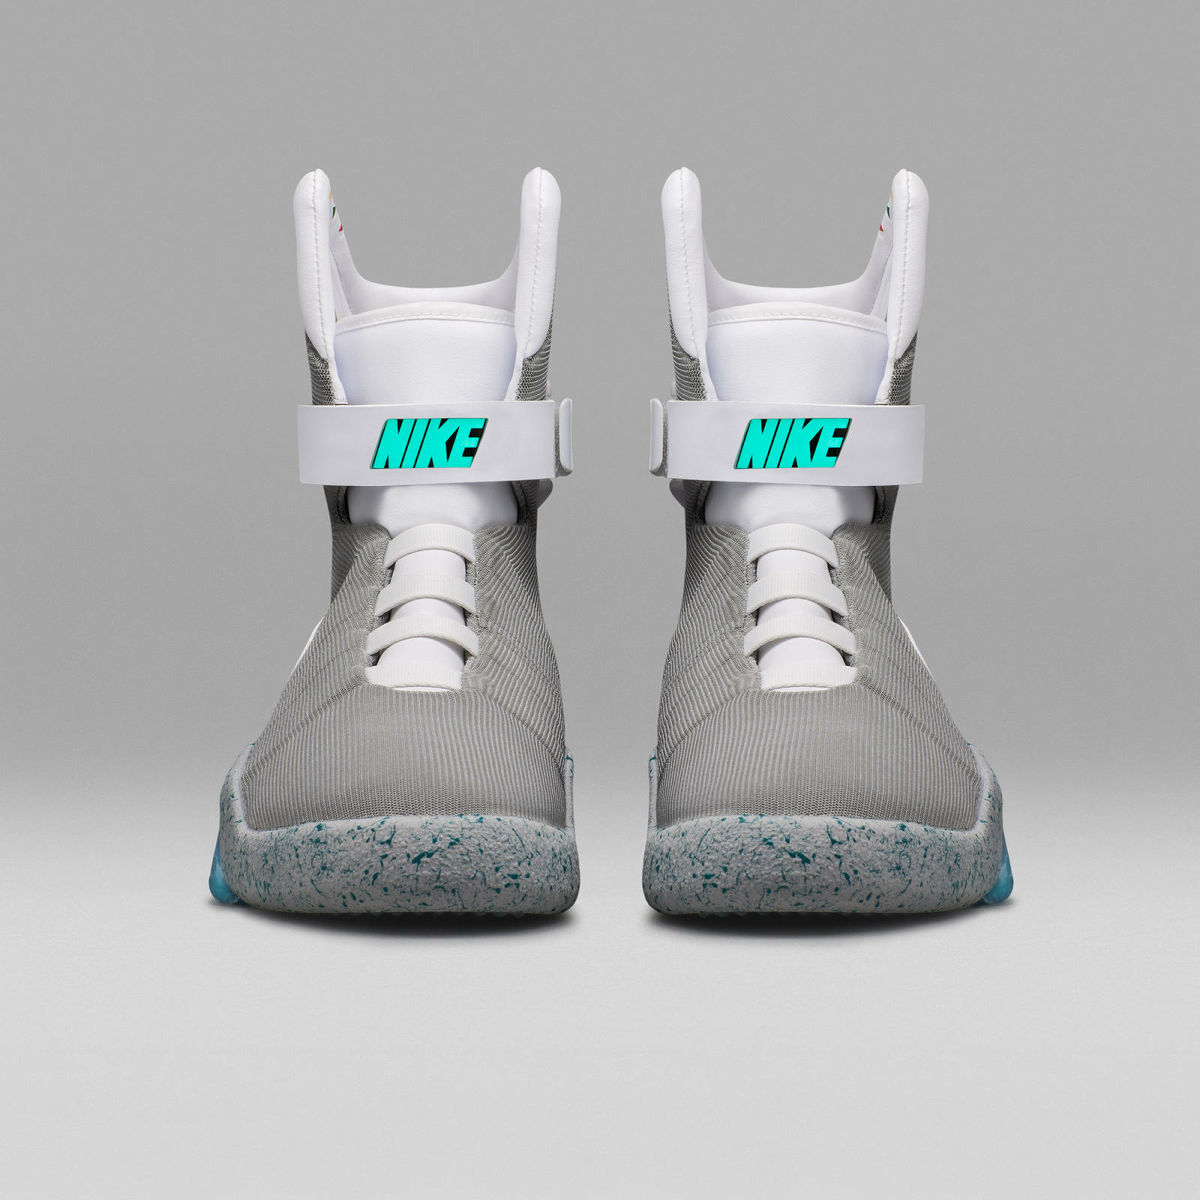 Literatura morfina Sada Back to the Future" sneaker "Nike Mag" finally appears, 89 charity drawing  starts only for 89 pairs - GIGAZINE